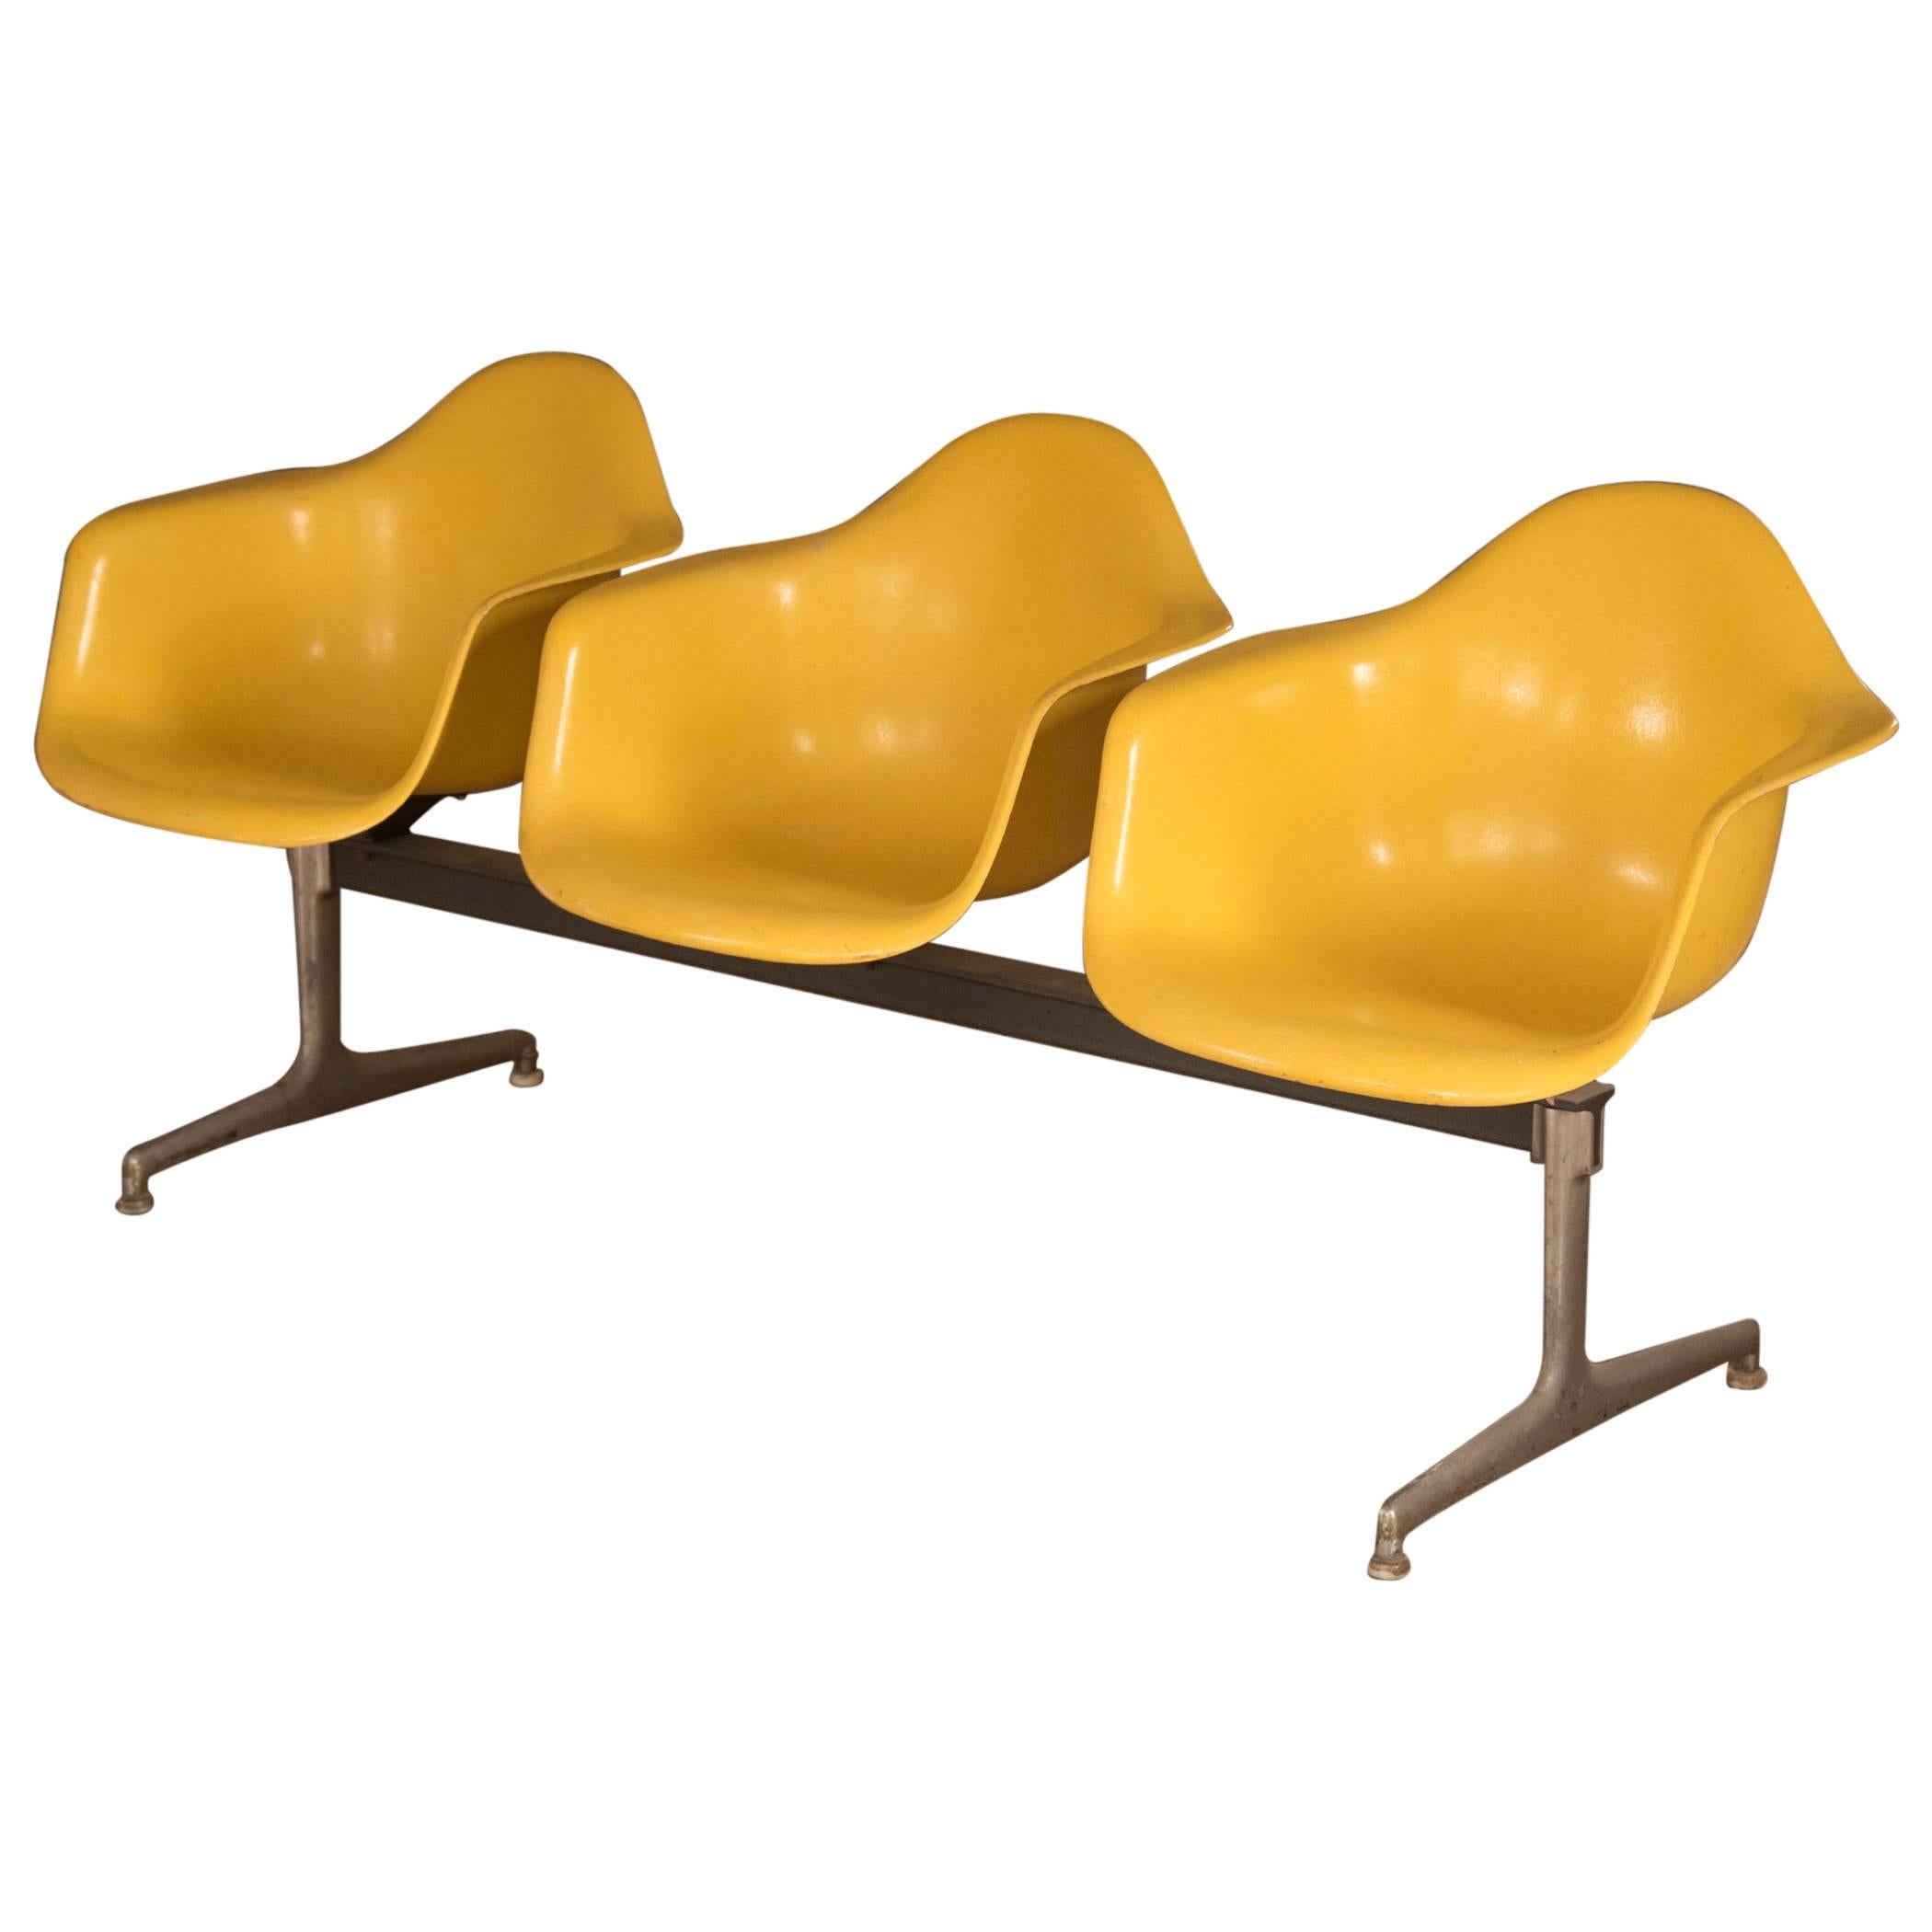 Charles & Ray Eames Three-Seat Shell Tandem Chairs for Herman Miller